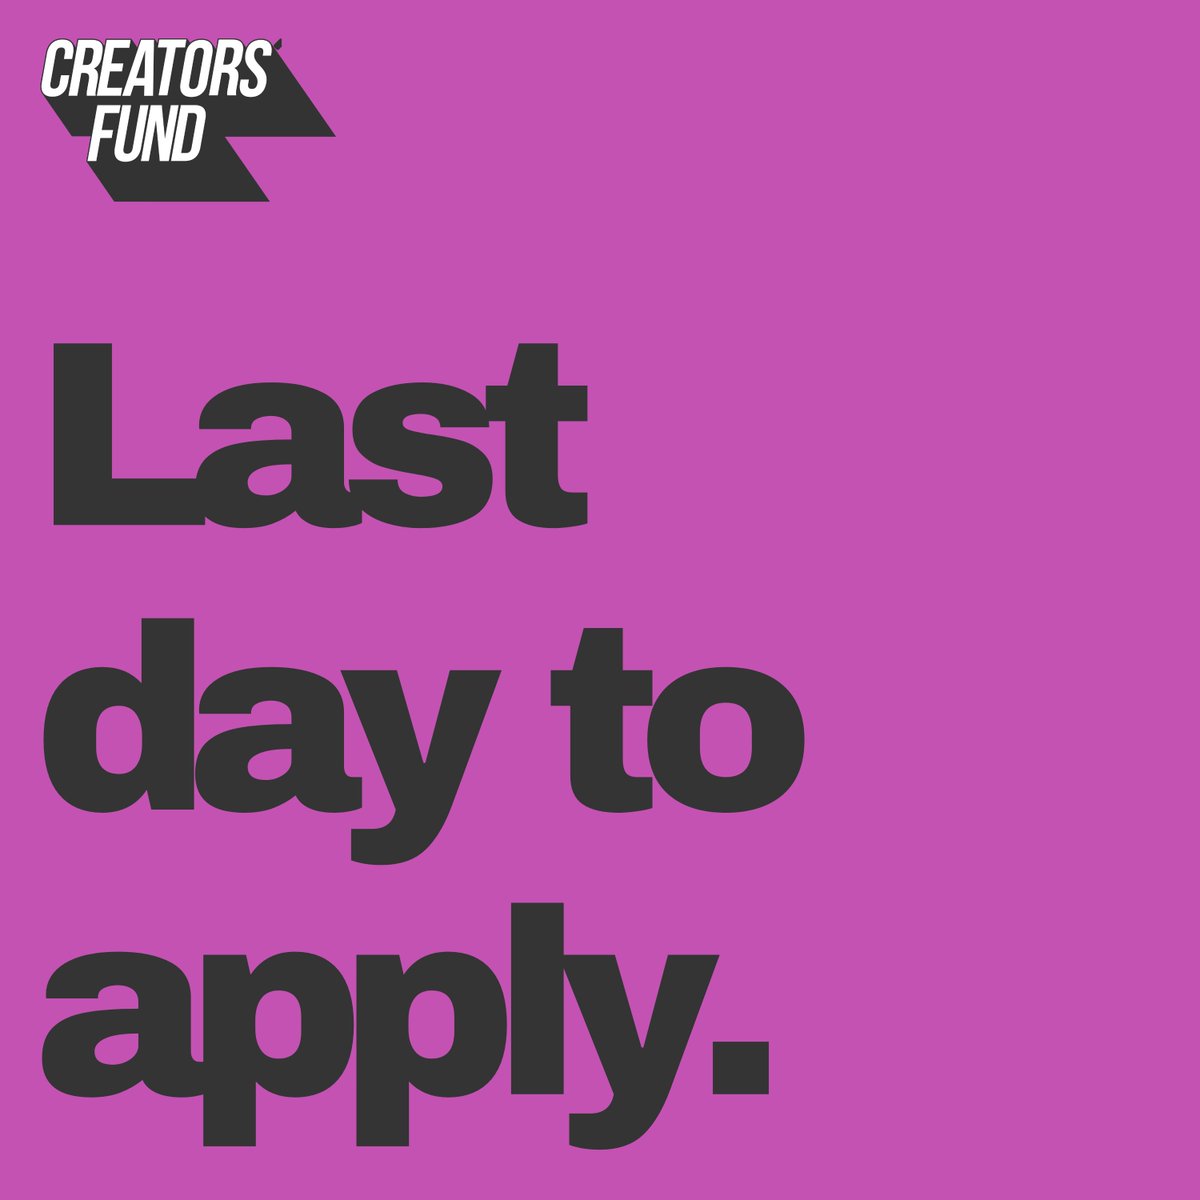 📢Today is the last day to apply for our Creators' Fund This aims to provide practical funding opportunities for BPoC creatives across Scotland, along with one-to-one mentorship from experienced industry professionals Deadline 11.59pm tonight bit.ly/wahs-cf3